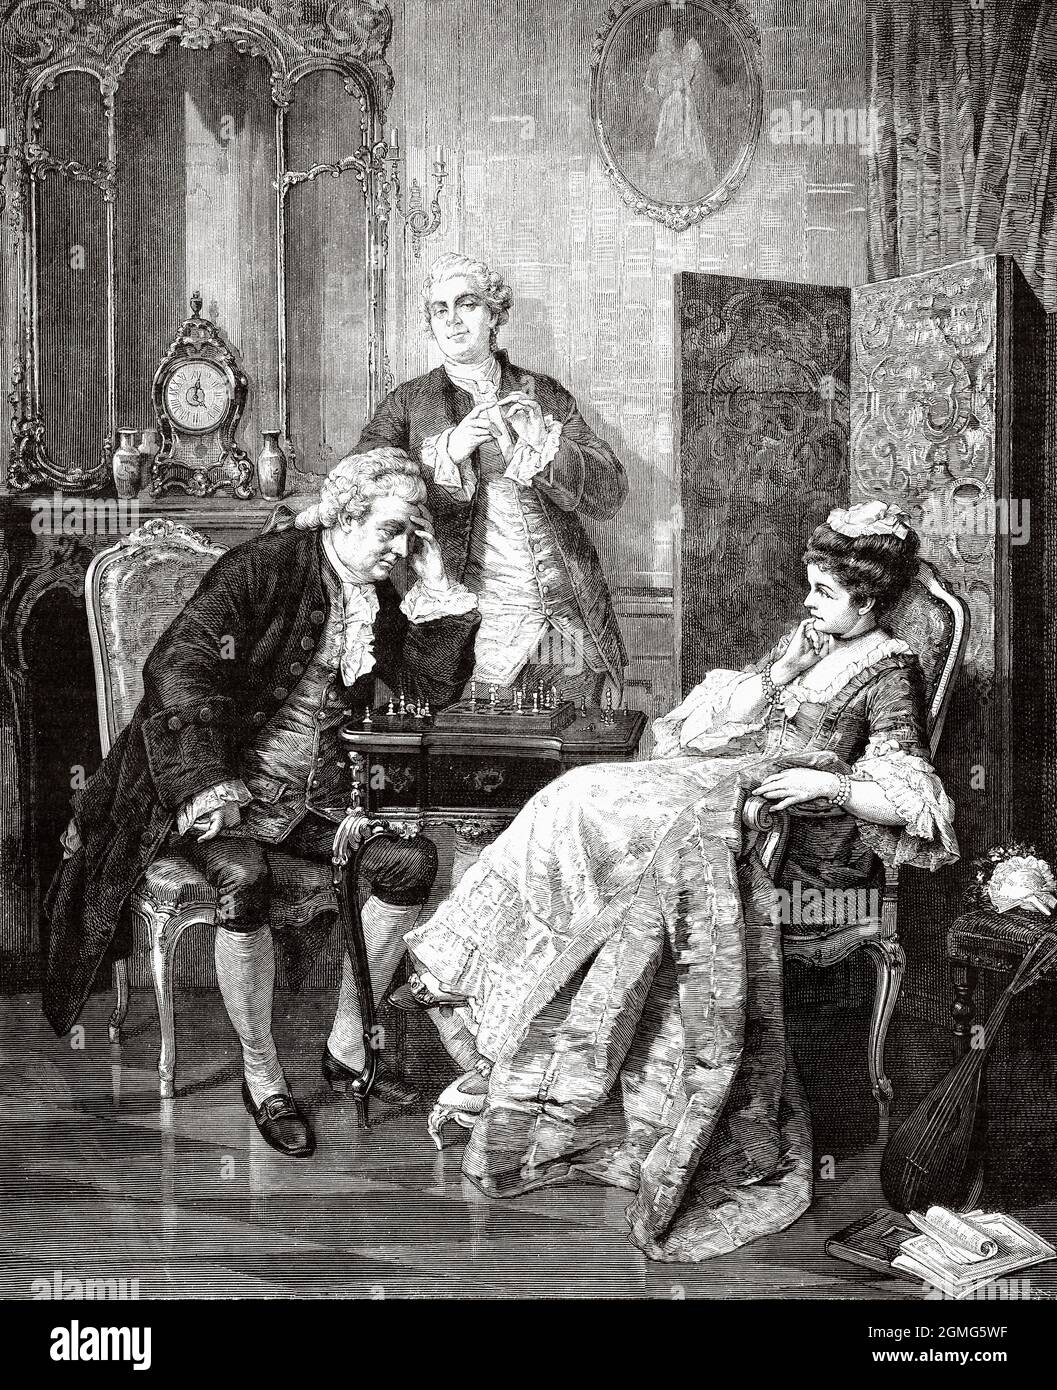 Chess players, painting by Otto Wilhelm Eduard Erdmann (1834-1905) was a German genre painter in the Rococo Revival style. Old 19th century engraved illustration from La Ilustración Artística 1882 Stock Photo